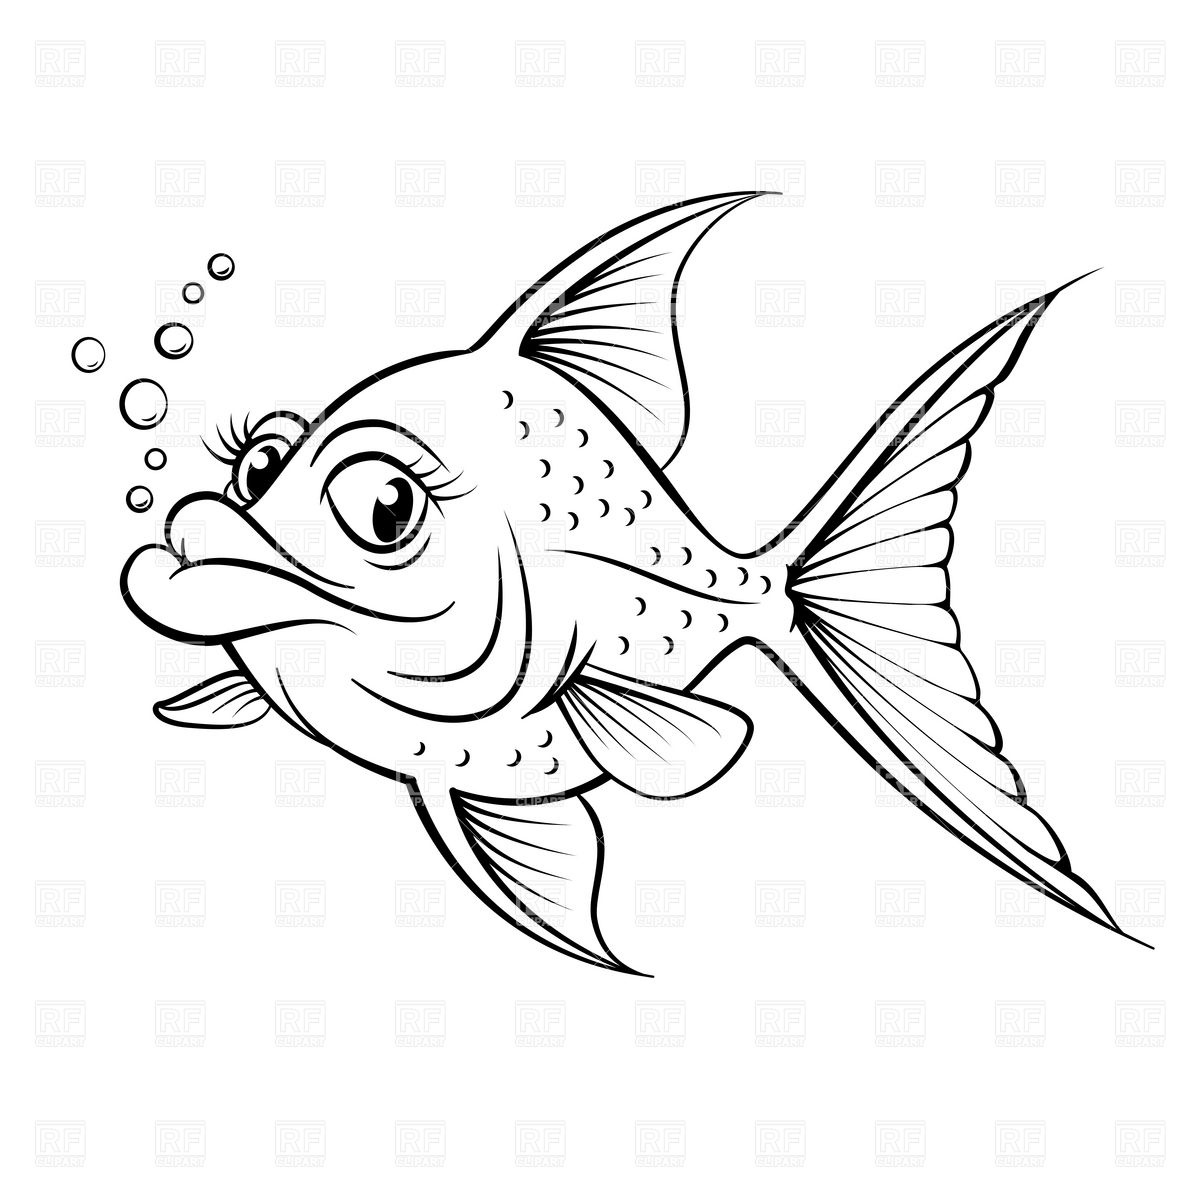 Sketch Of Cartoon Fish Outline 7046 Silhouettes Outlines Download